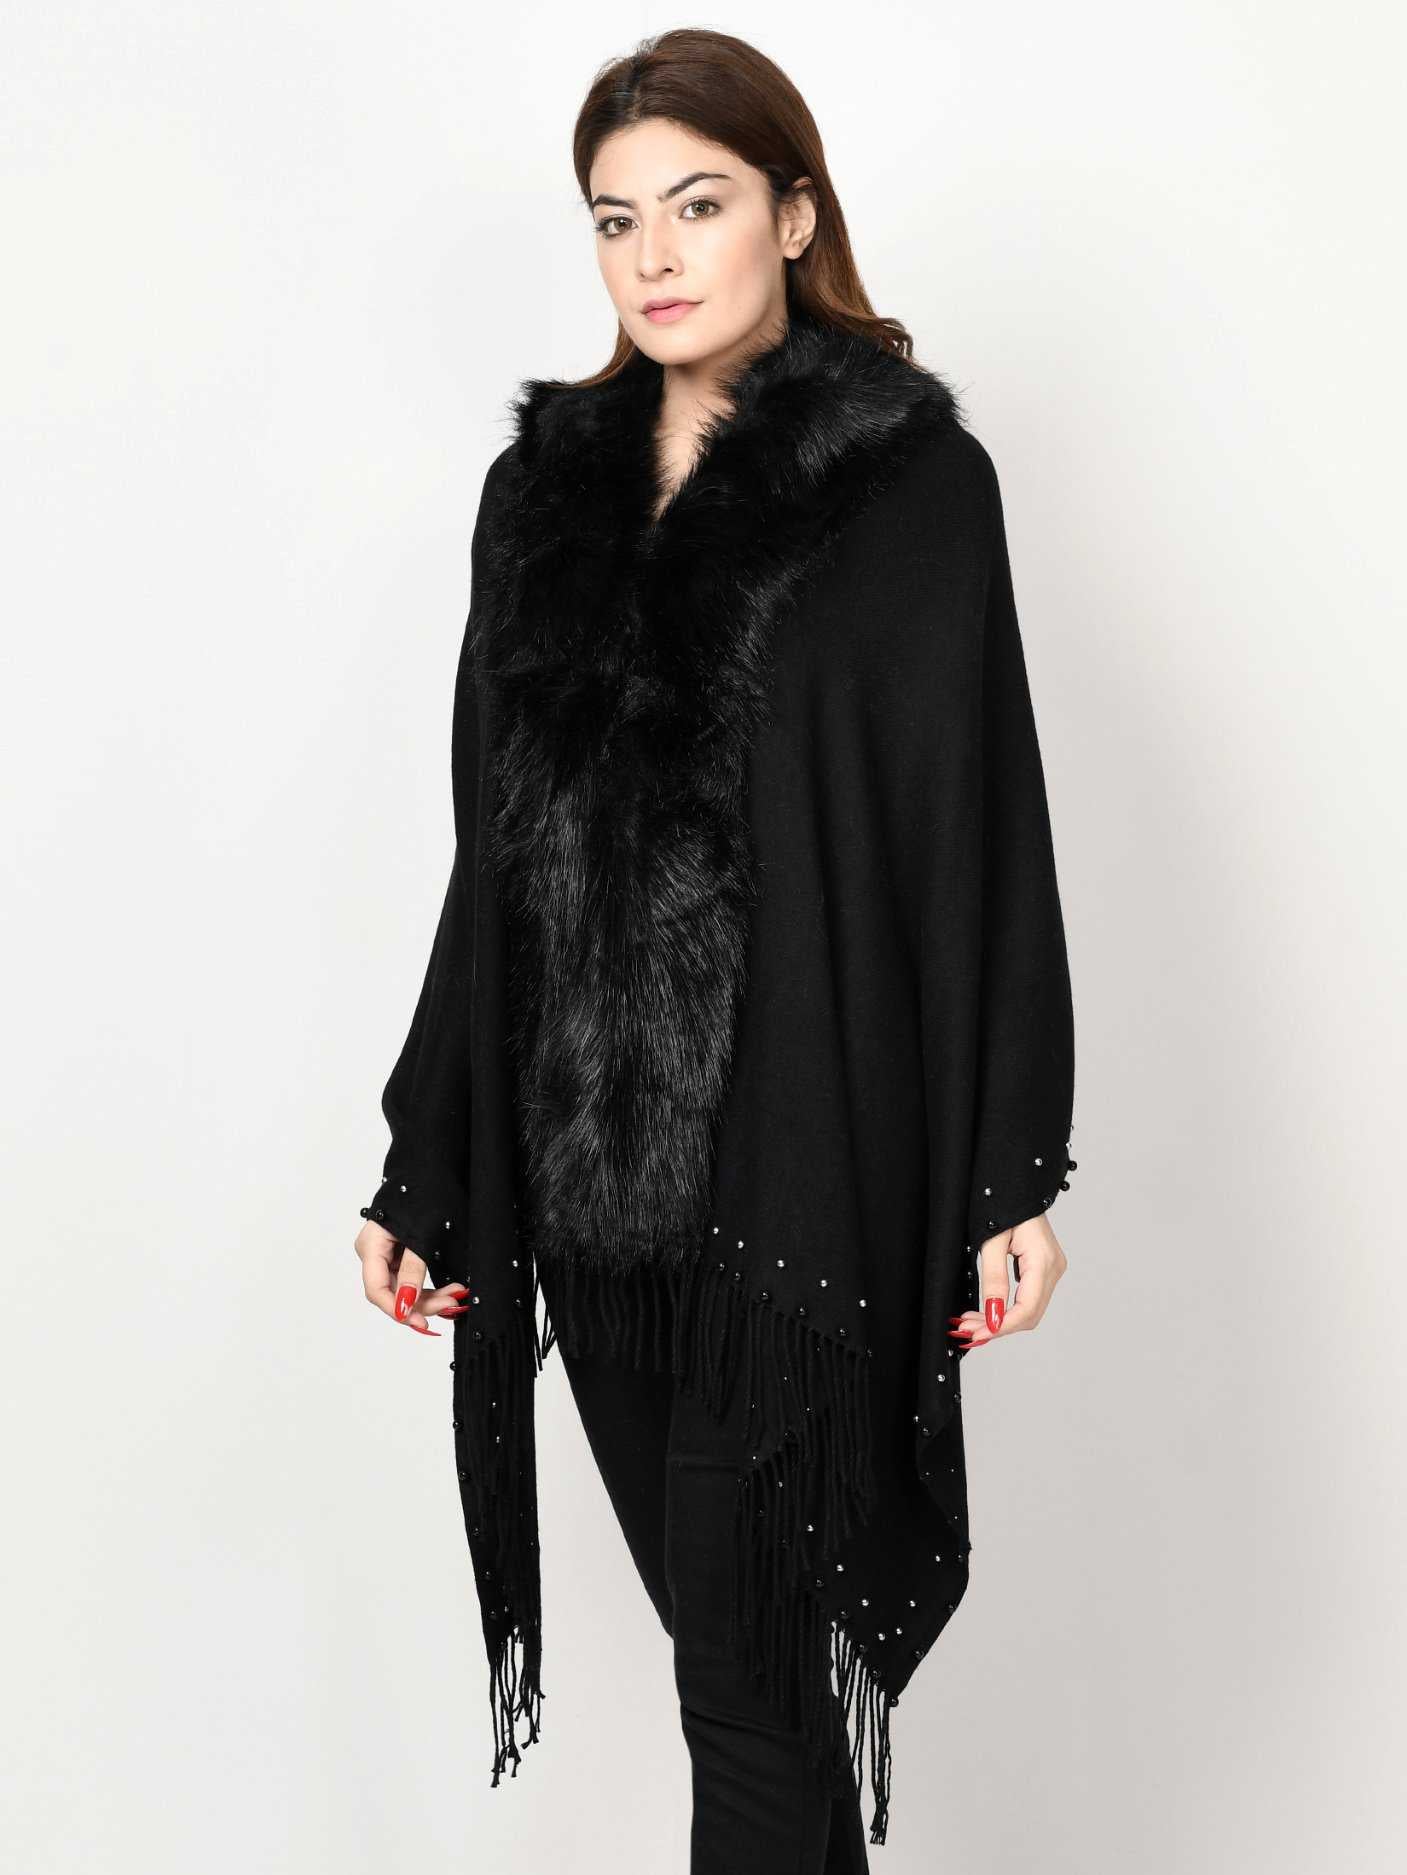 Limelight Beaded Fur Cape Shawl CPS87-FRE-BLK 2019 | Limelight Sale 2020